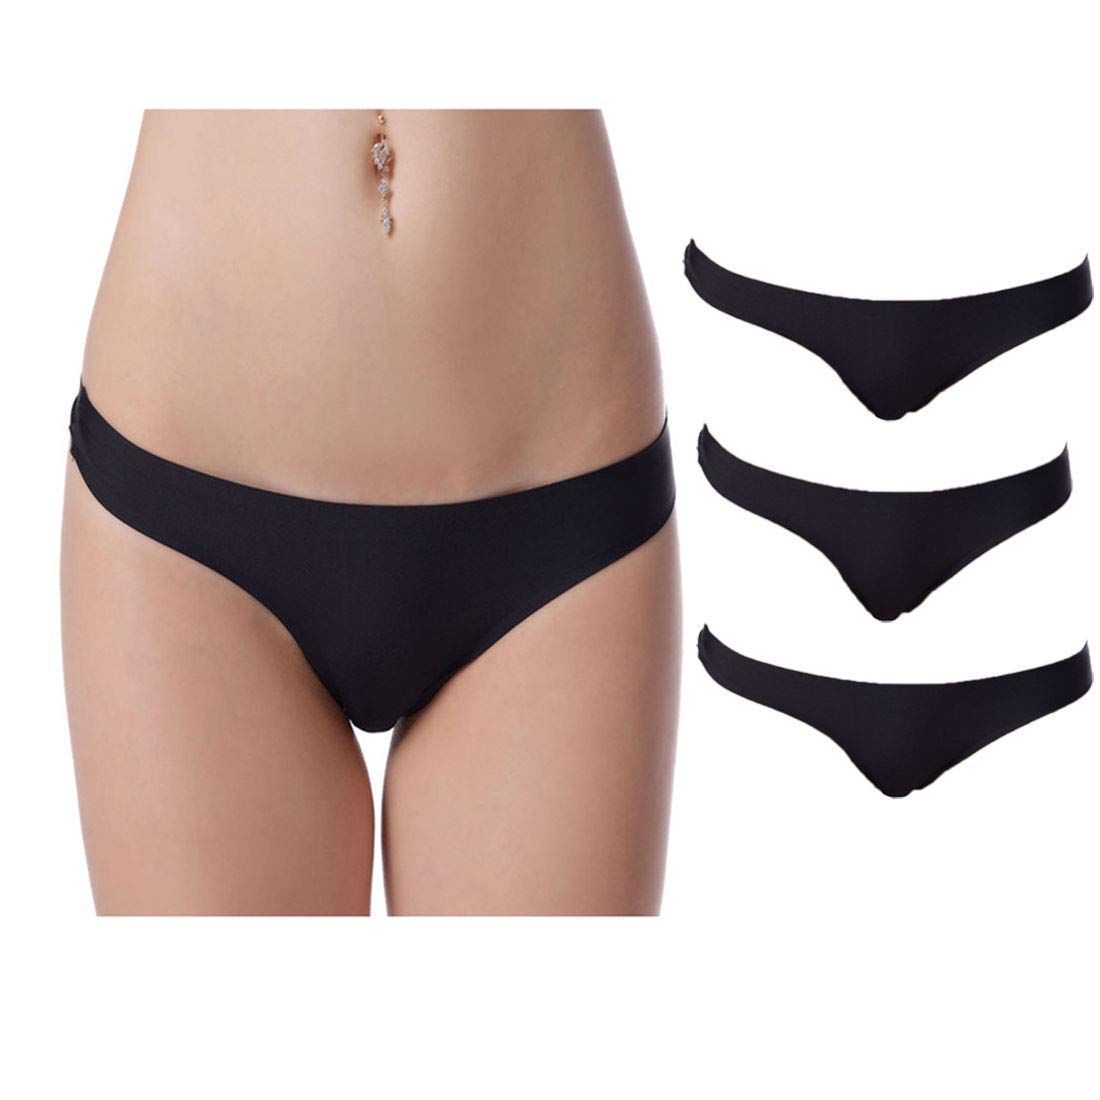 What's the Most Comfortable Women's Underwear? – Parade